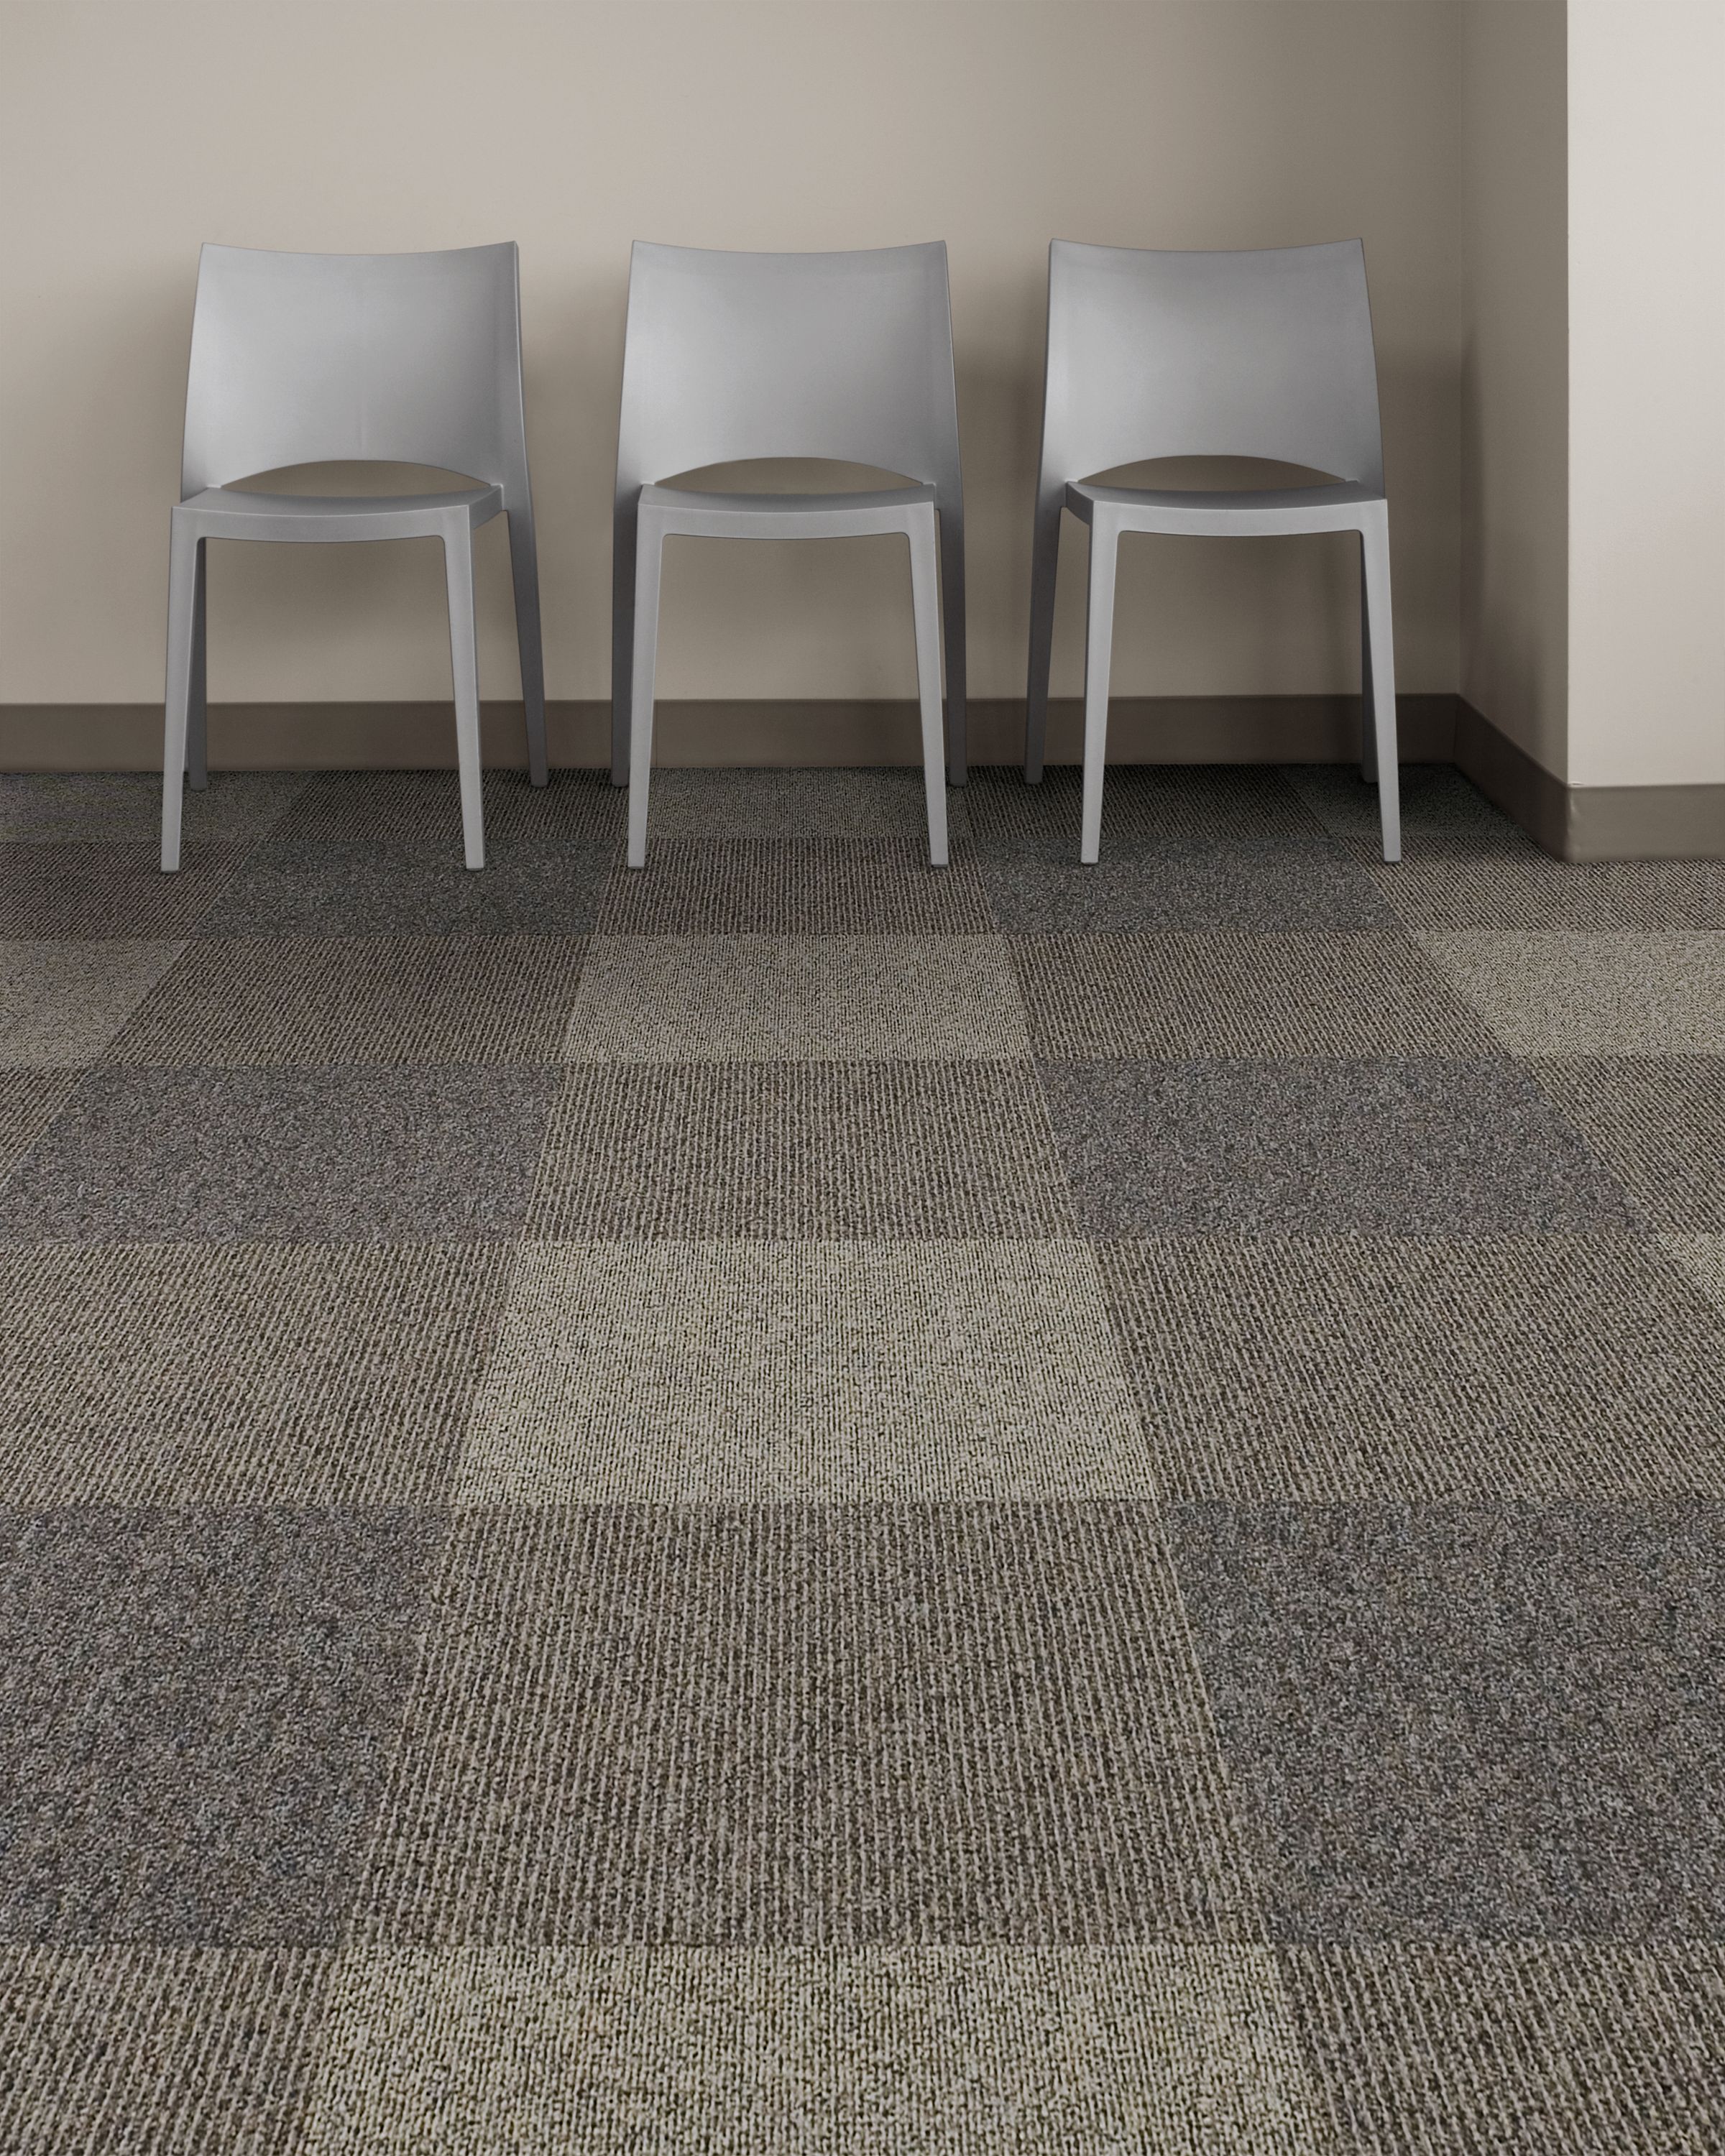 Interface Broomed, Grooved and Brushed carpet tile in room with three chairs imagen número 4